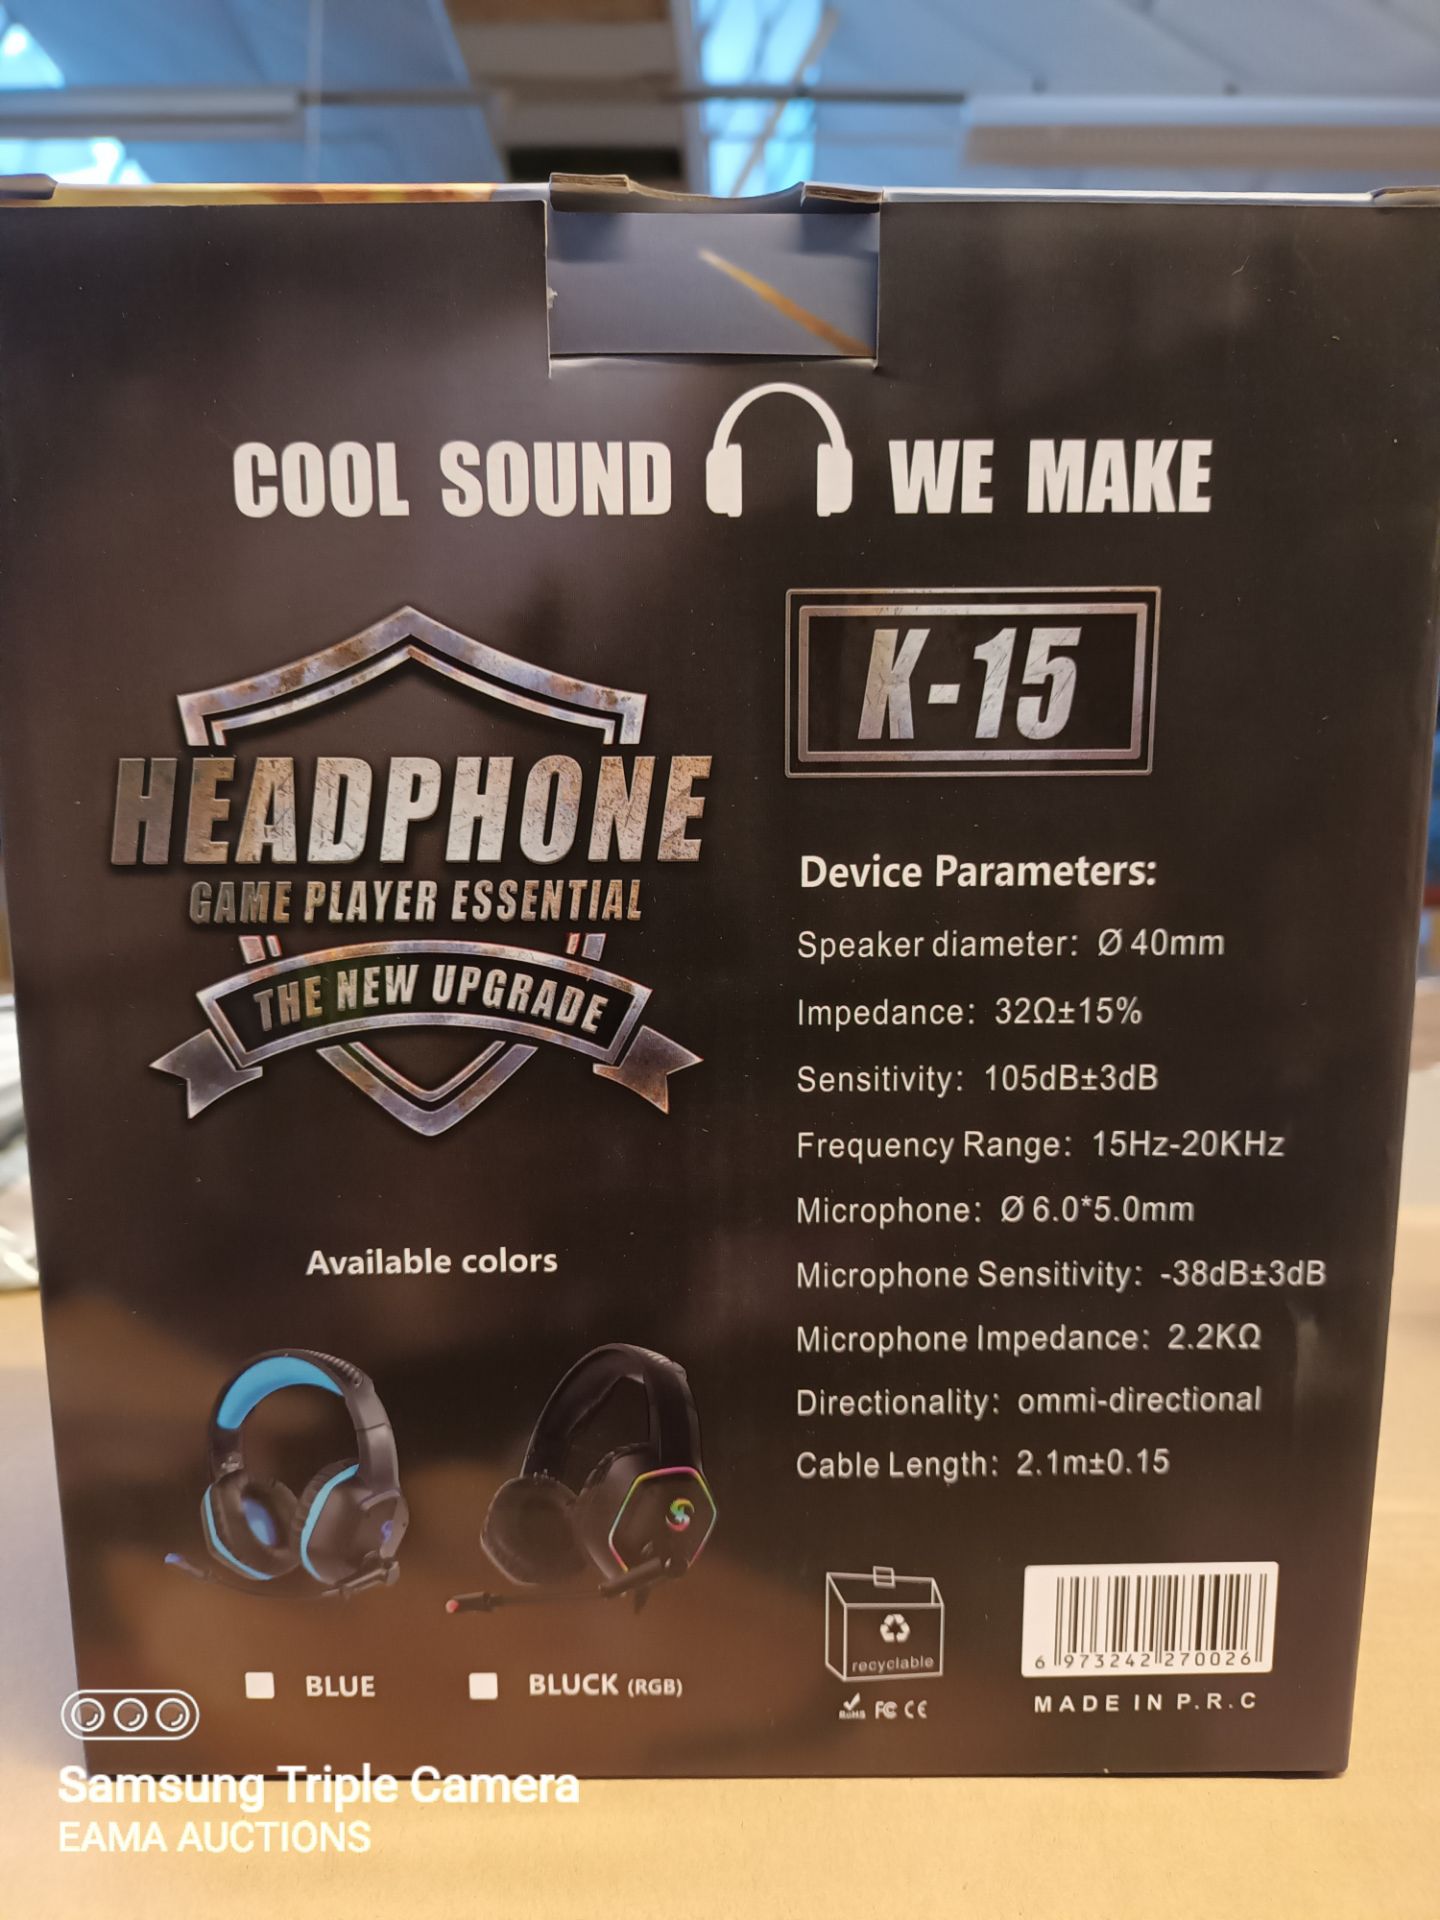 (BAG 1-15) 1 X HEADPHONE GAME PLAYER ESSENTIAL - Image 2 of 7